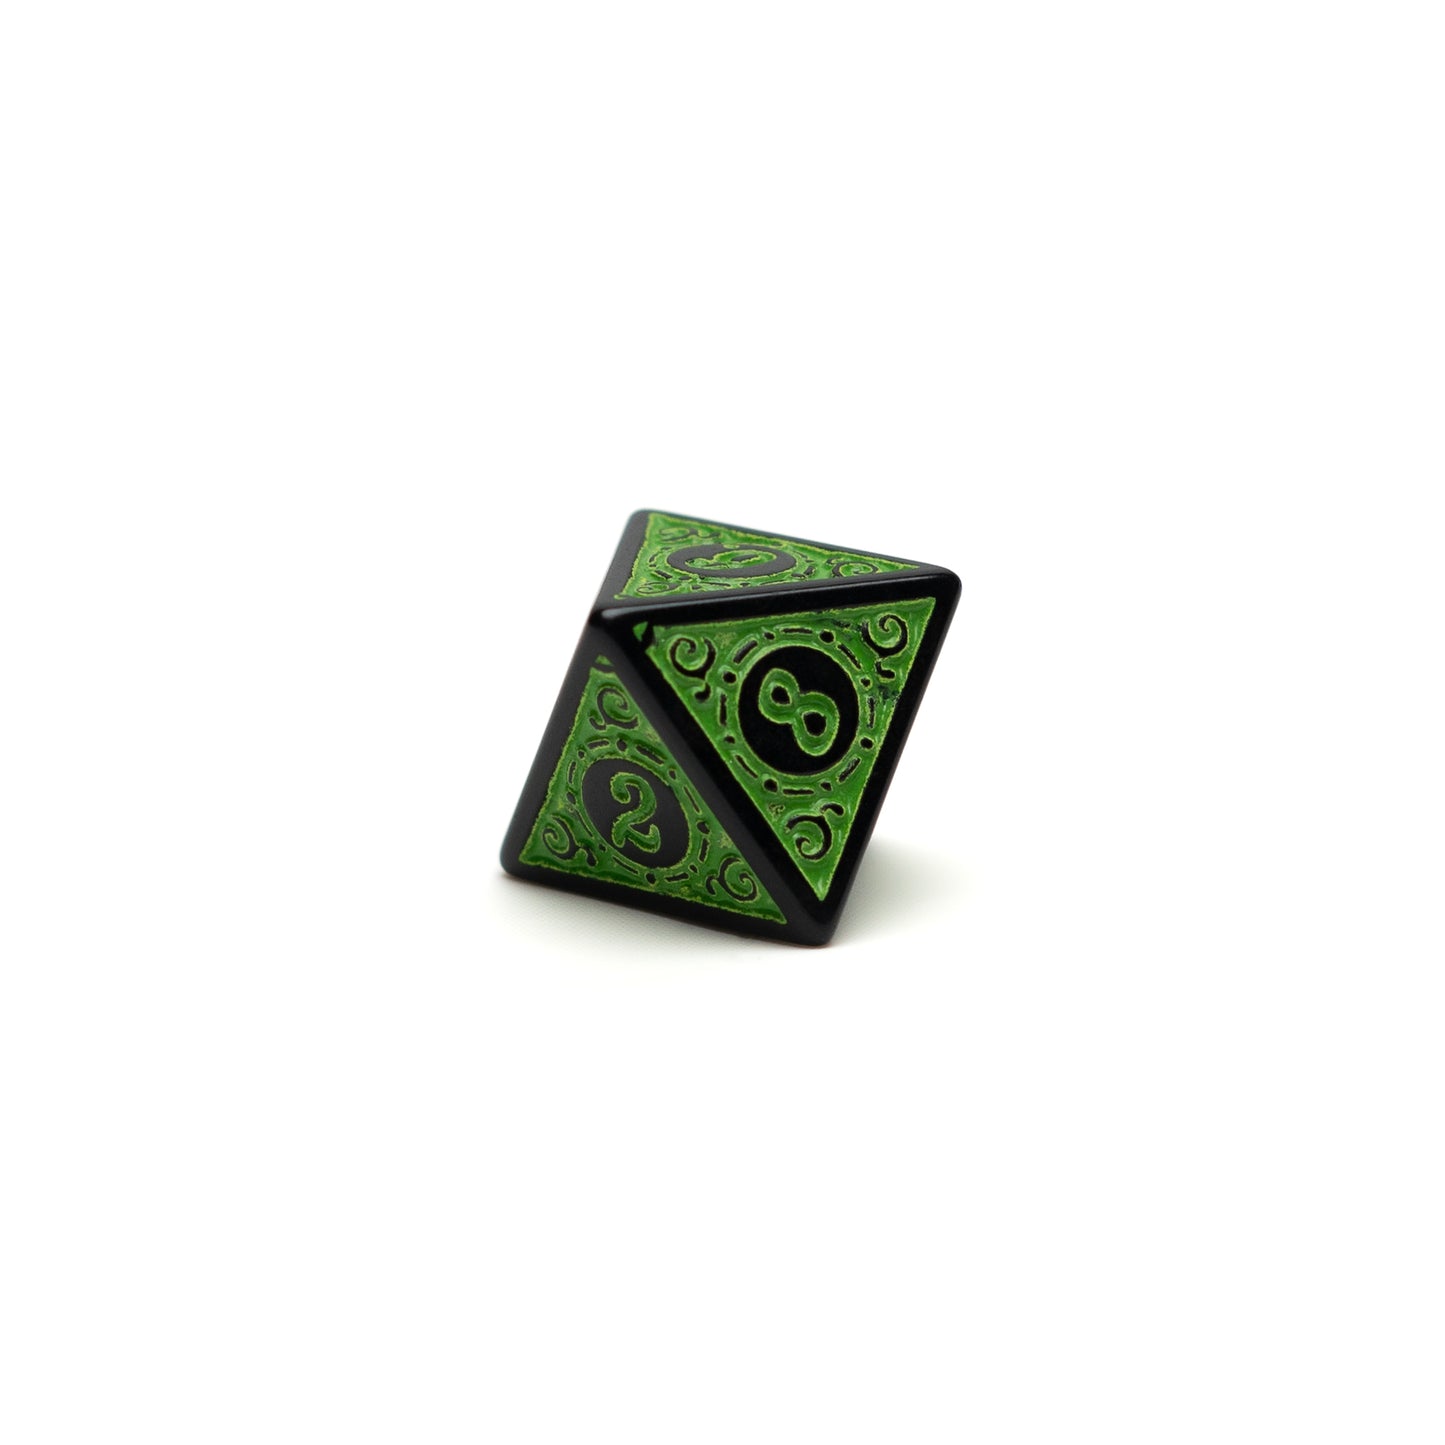 Roll Britannia Keth Frostiron Dungeons and Dragons D8 Dice with Green Military Aesthetic